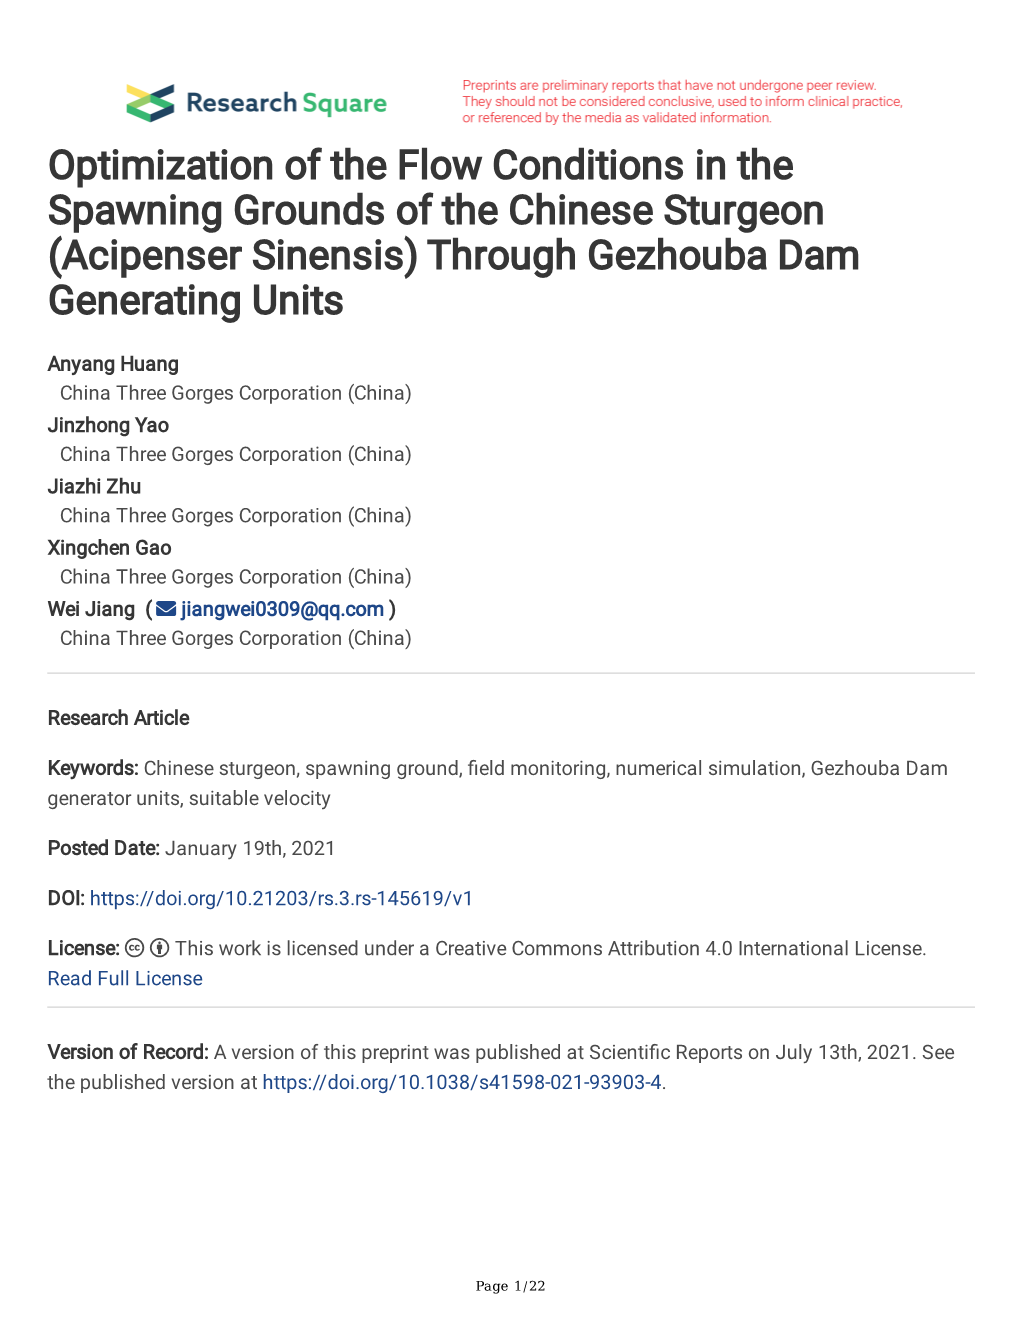 Optimization of the Flow Conditions in the Spawning Grounds of the Chinese Sturgeon (Acipenser Sinensis) Through Gezhouba Dam Generating Units